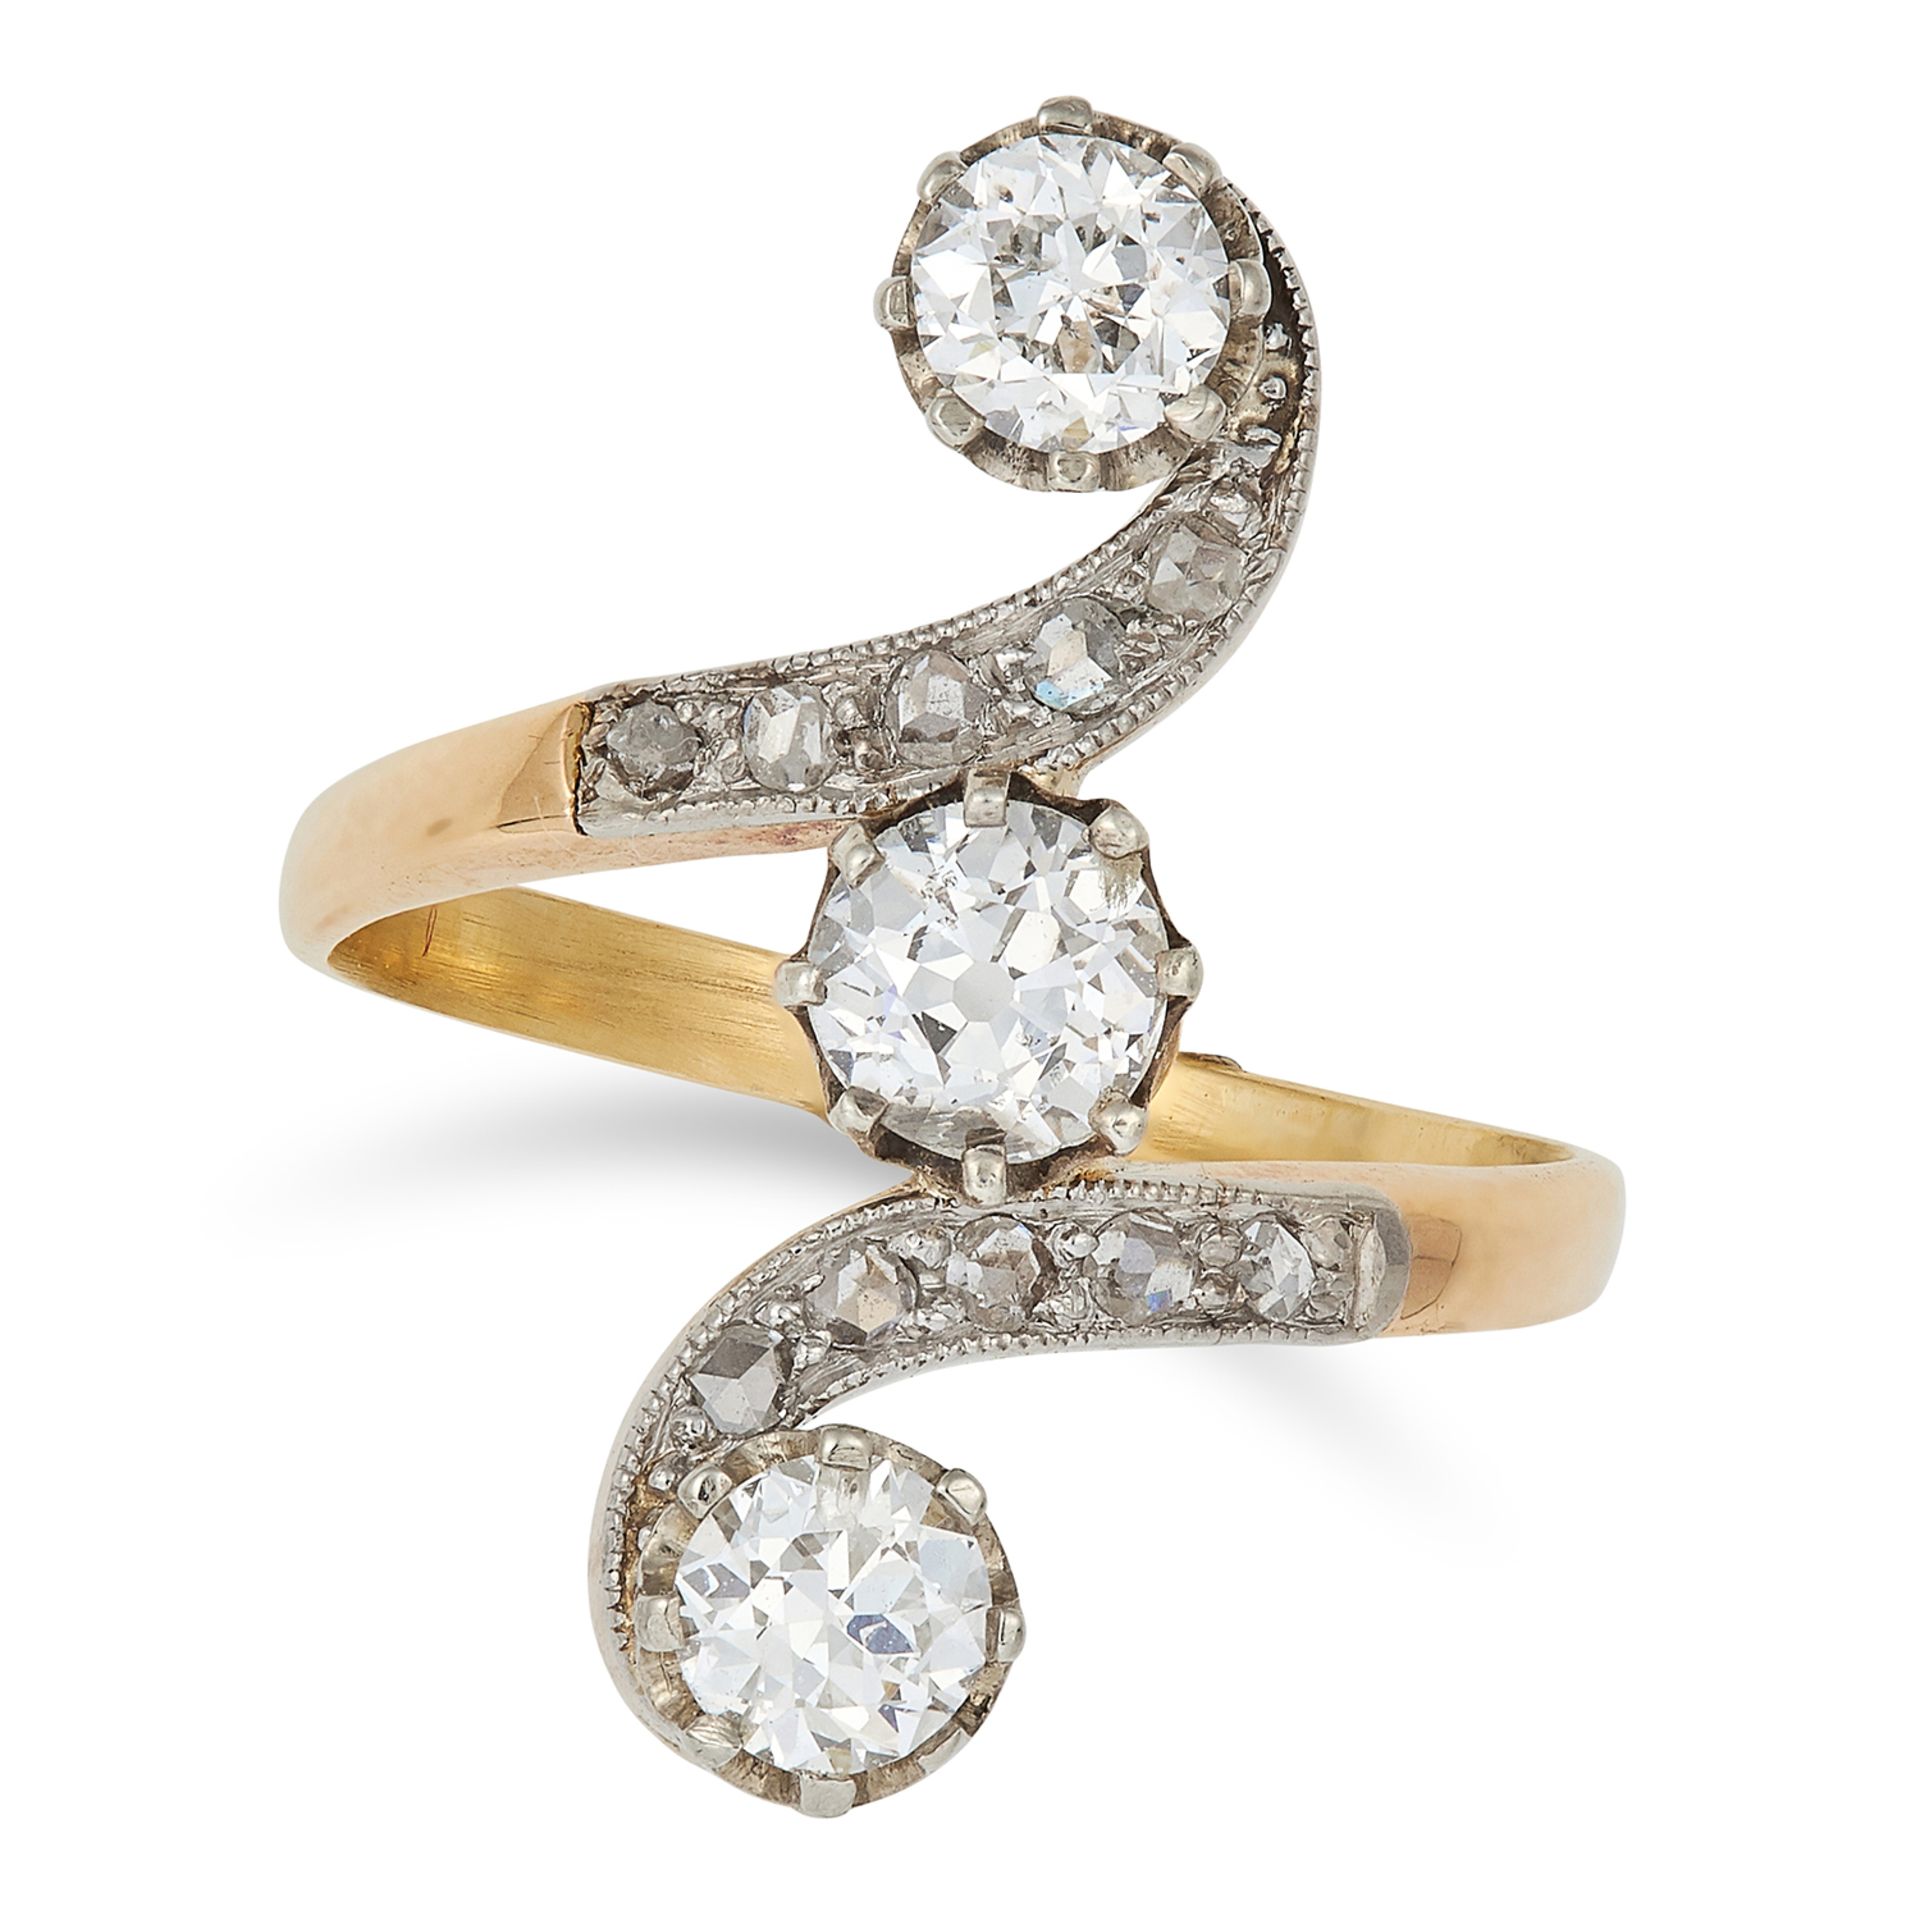 ANTIQUE DIAMOND DRESS RING set with round and rose cut diamonds in twisted design, size J / 4.5,